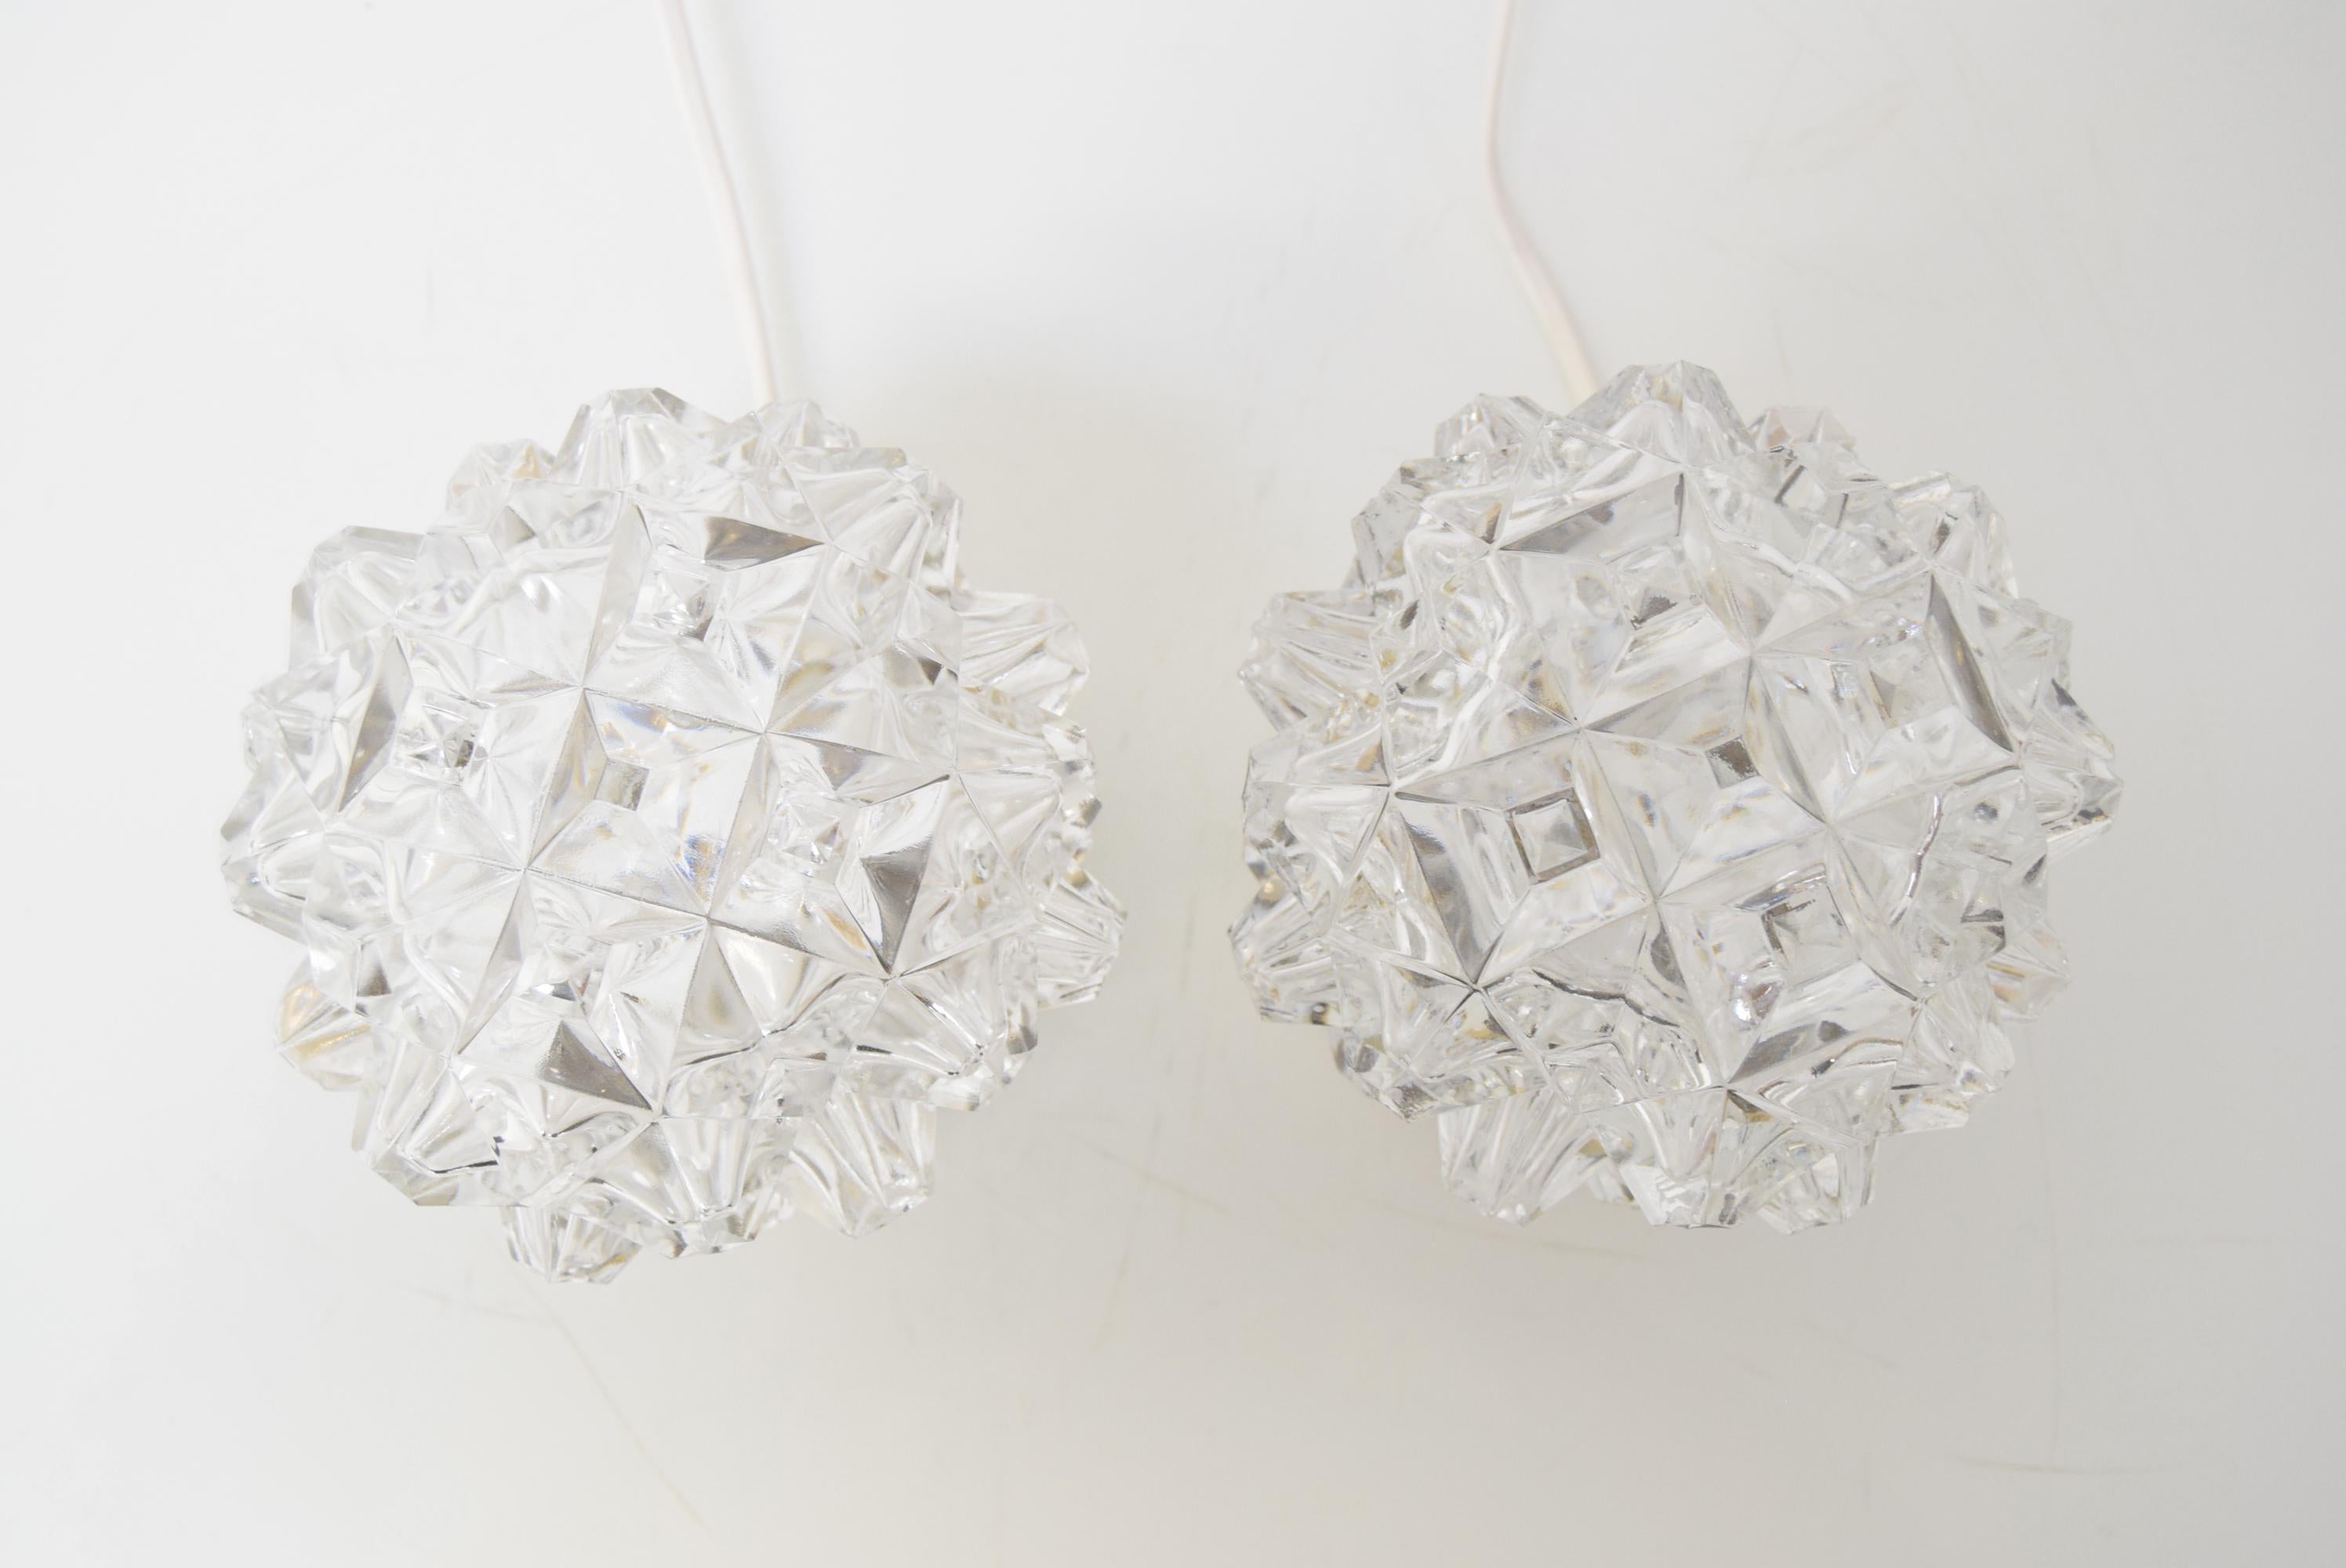 Pair of Design Table or Wall Lamps by Preciosa, Kamenicky Senov, 1960's. For Sale 1